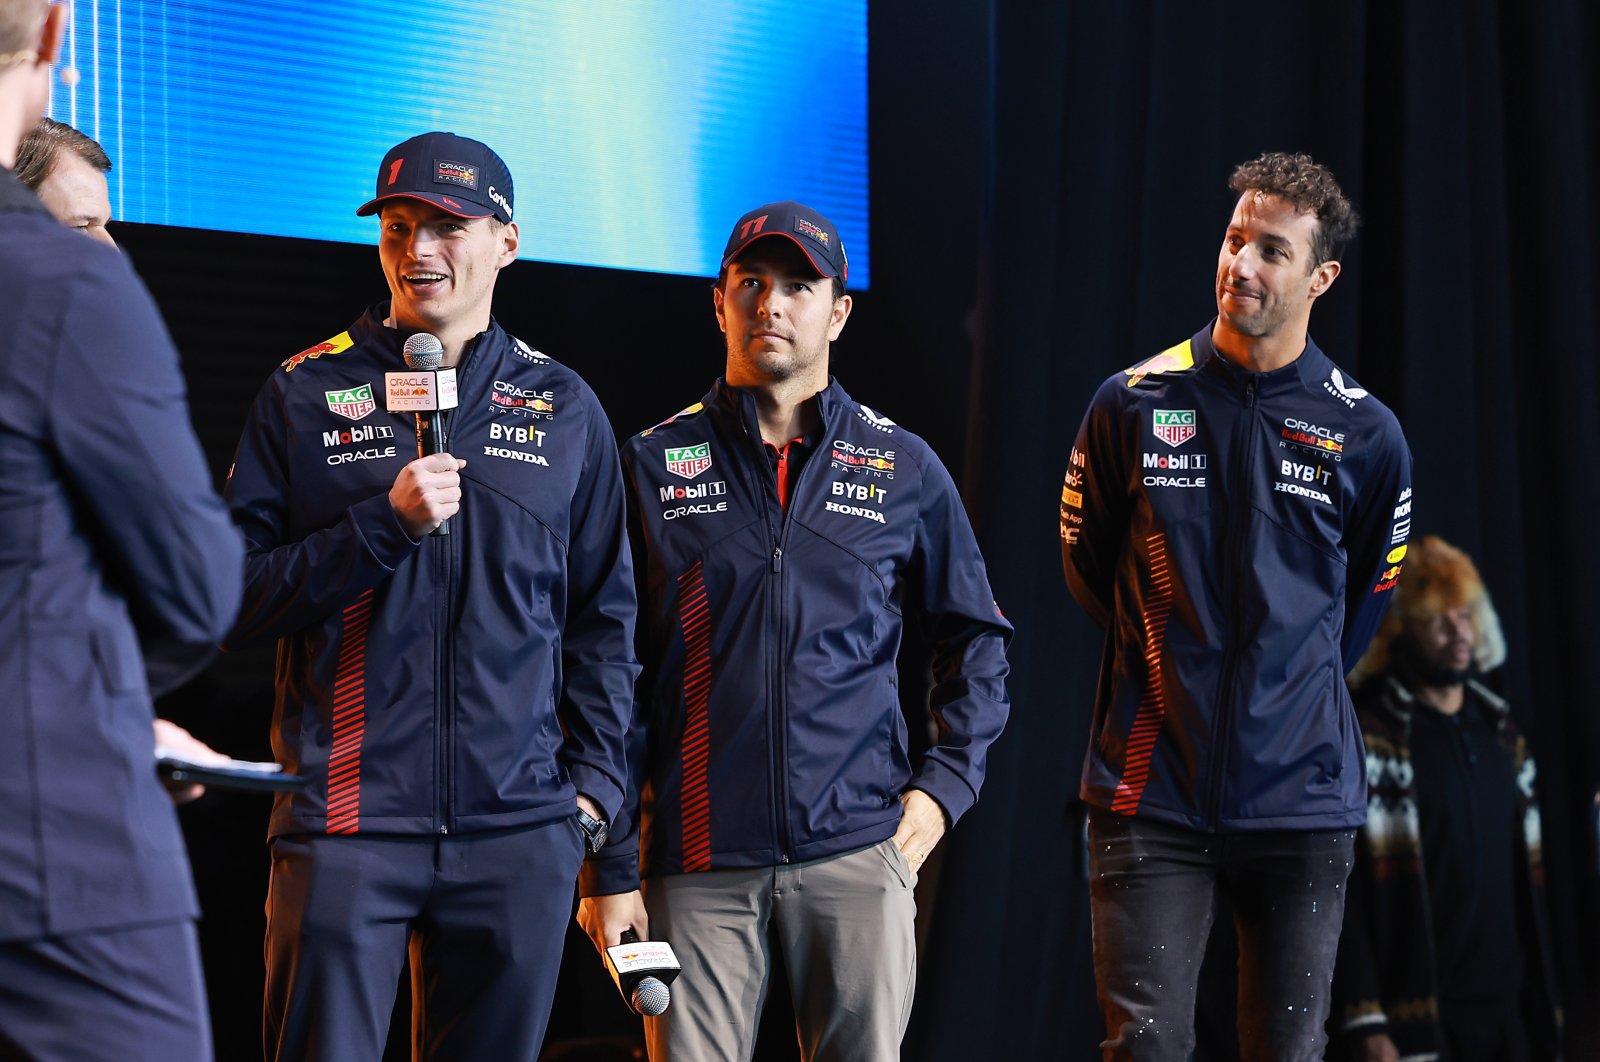 Netherlands&#039; Max Verstappen and Oracle Red Bull Racing talk on stage next to Sergio Perez of Mexico and Oracle Red Bull Racing and Daniel Ricciardo of Australia and Oracle Red Bull Racing during the Oracle Red Bull Racing Season Launch 2023 at Classic Car Club Manhattan, New York City, Feb. 3, 2023. (Getty Images Photo)